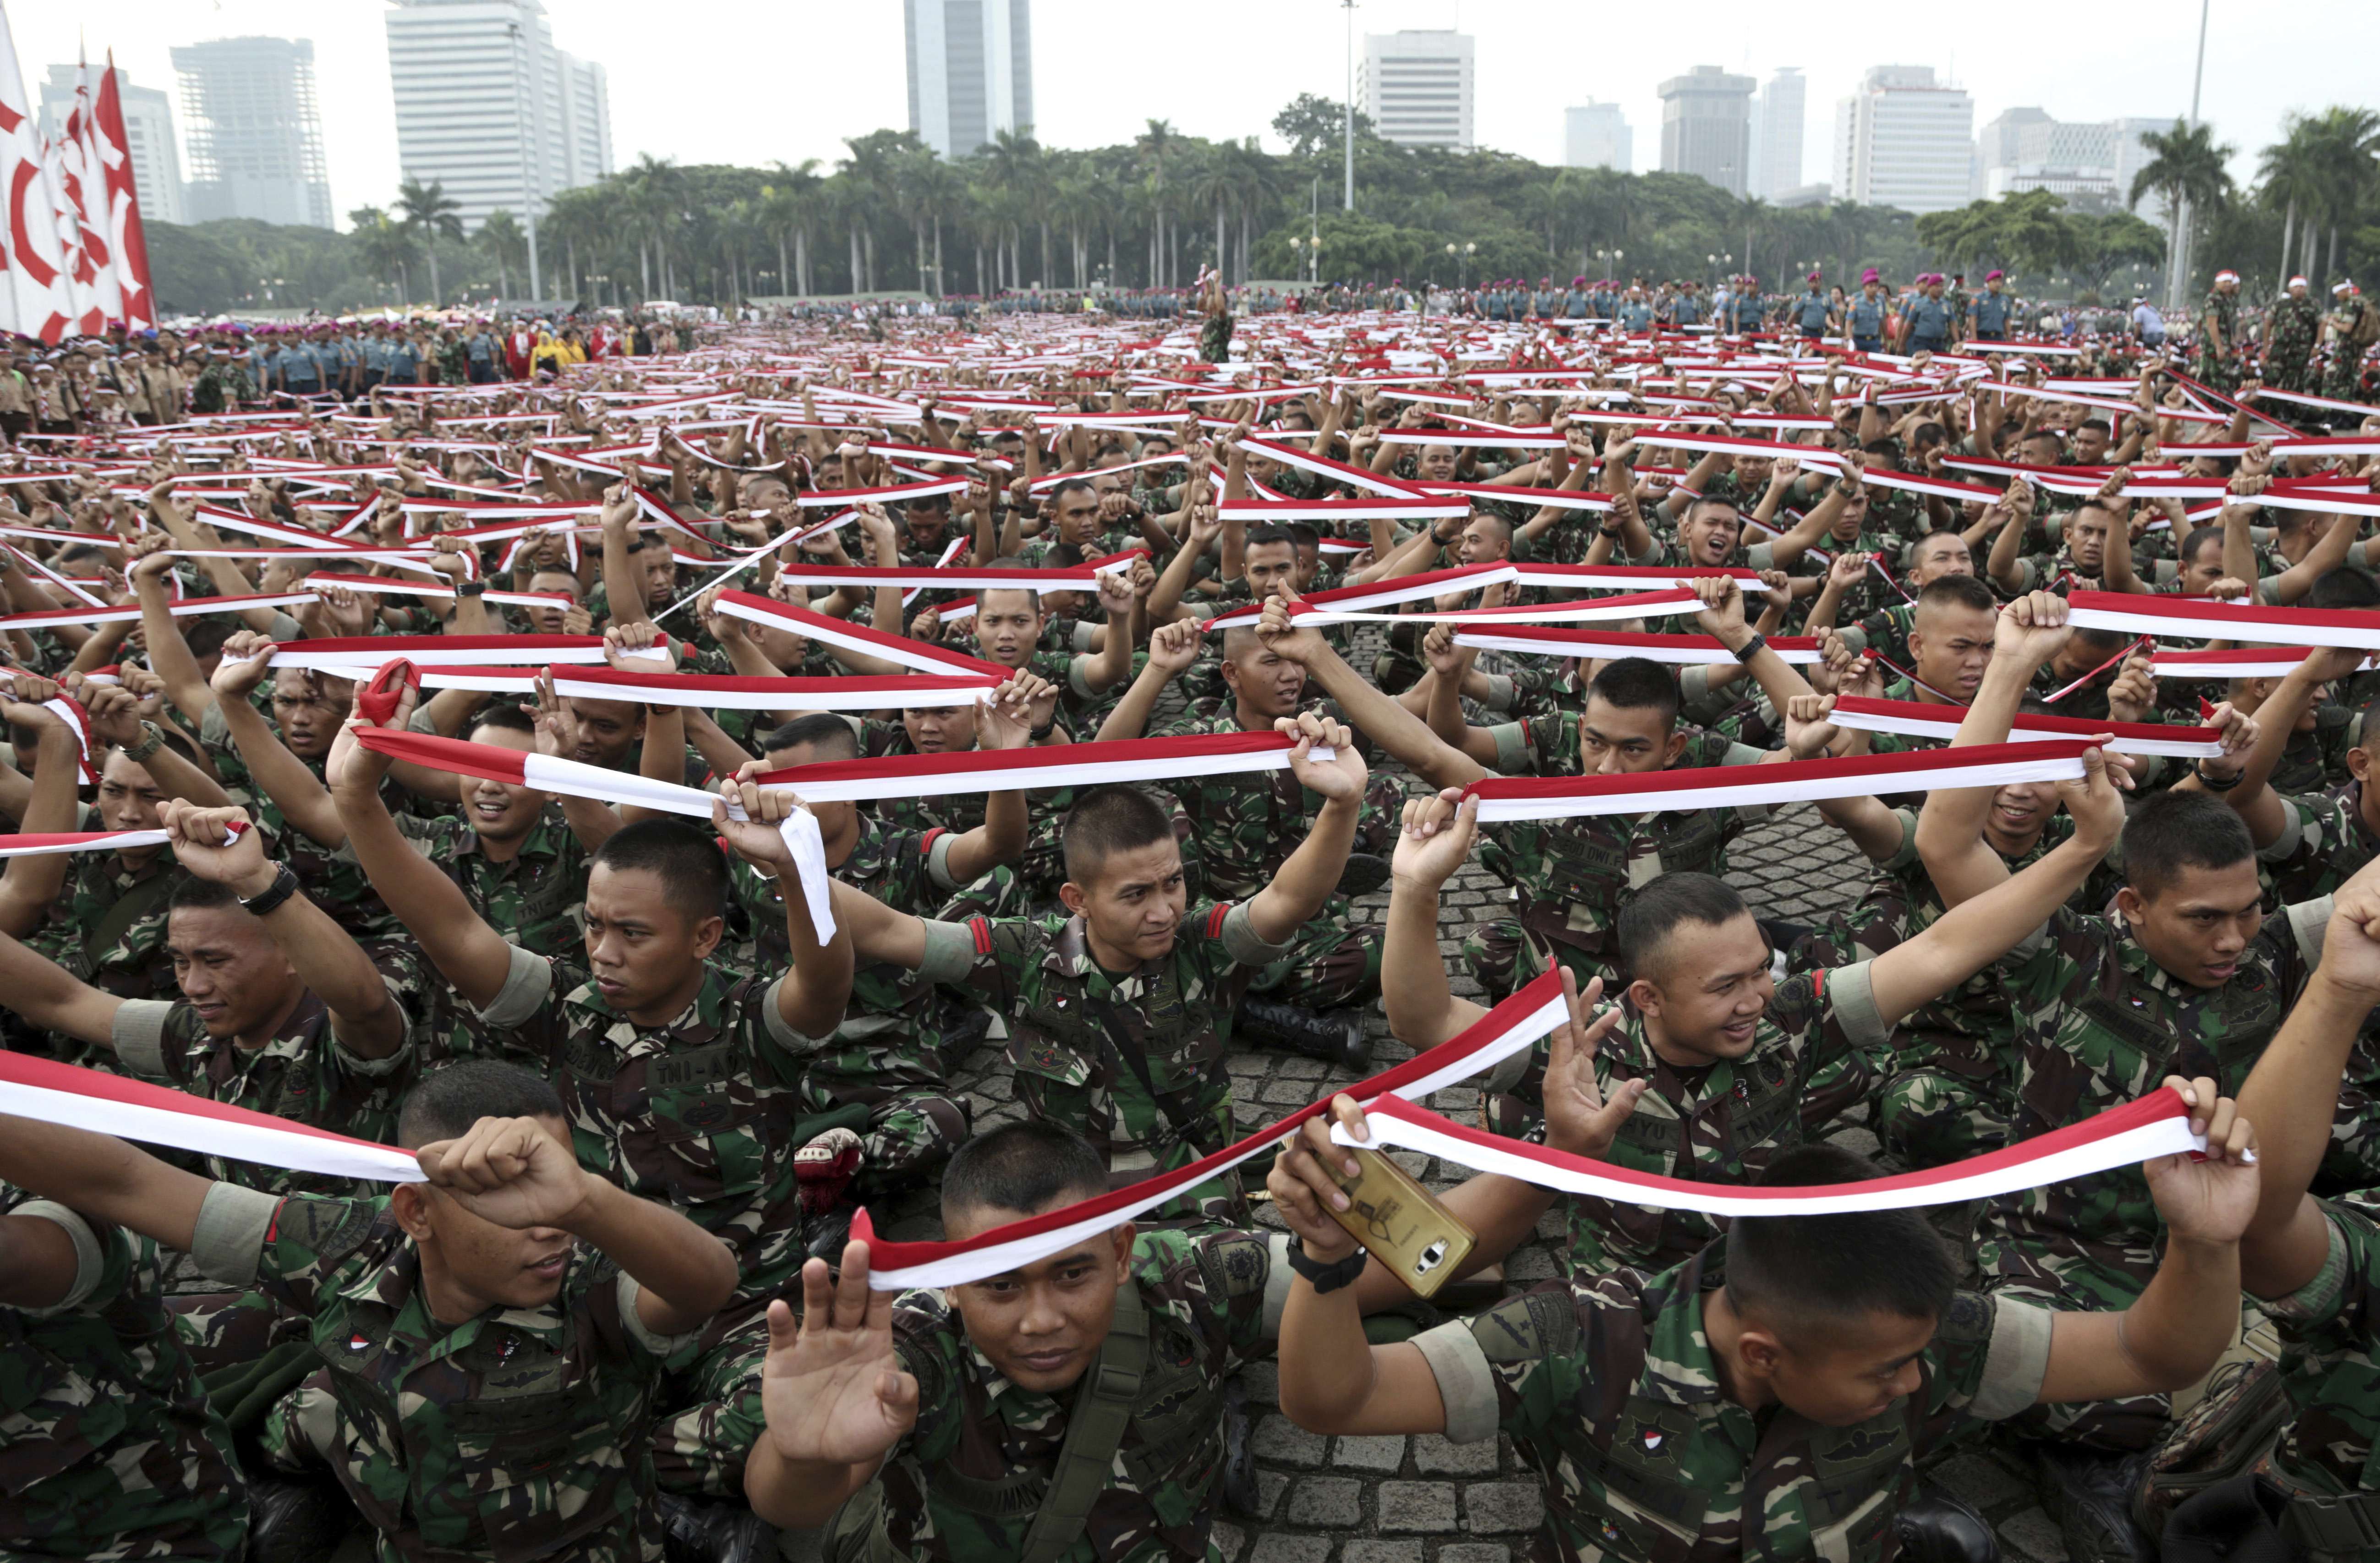 Indonesian soldiers hold up headbands in the colour of the national Red-White flag during a military-sponsored interfaith rally held ahead of a Muslim rally against Jakarta Governor Basuki Tjahaja Purnama. Photo: AP